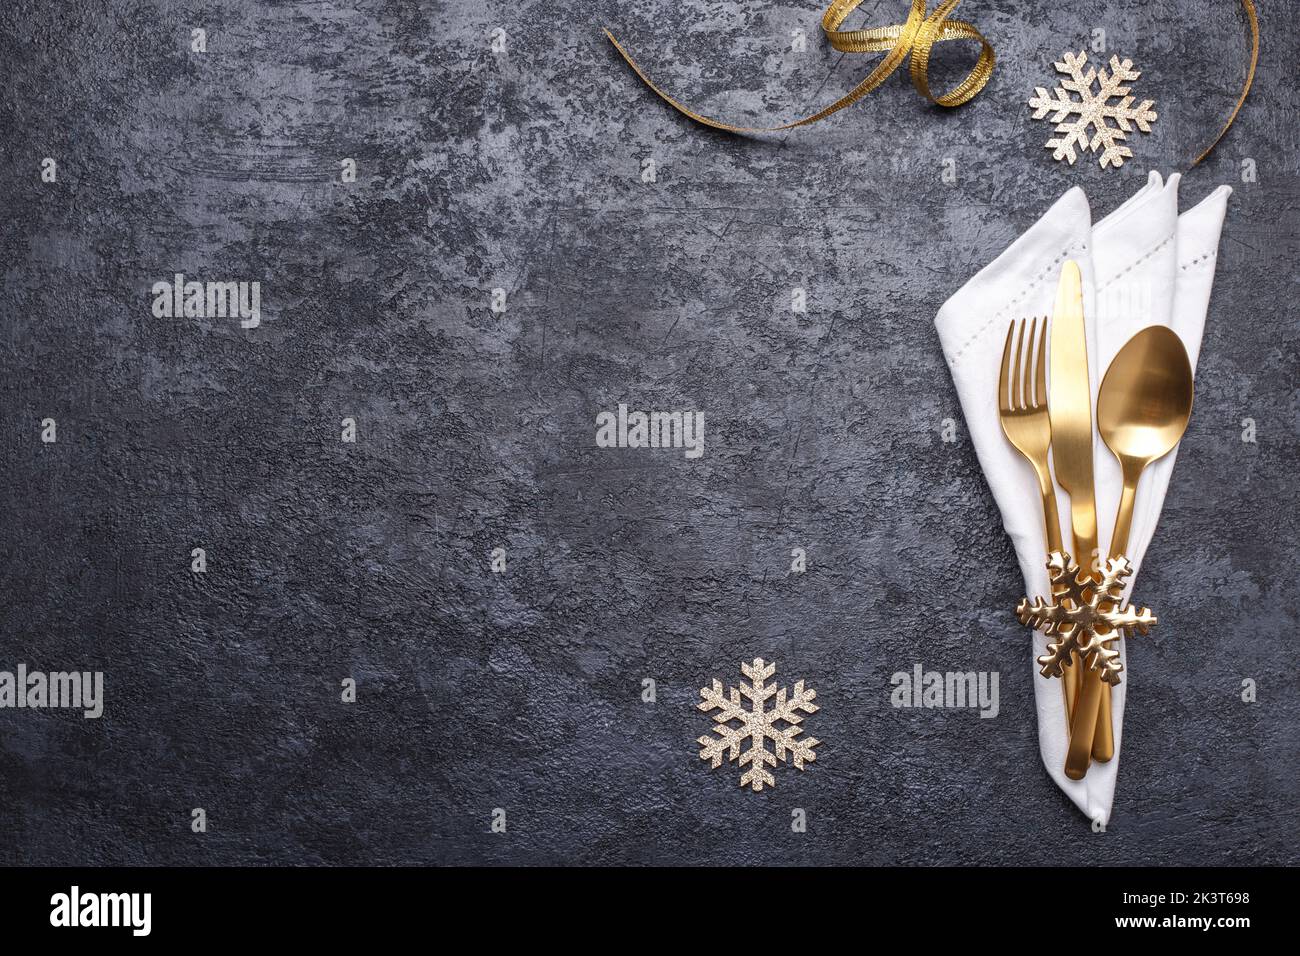 Table setting with golden cutlery and white napkin on the black stone table, Christmas or new year card or menu template copy space flat lay Stock Photo